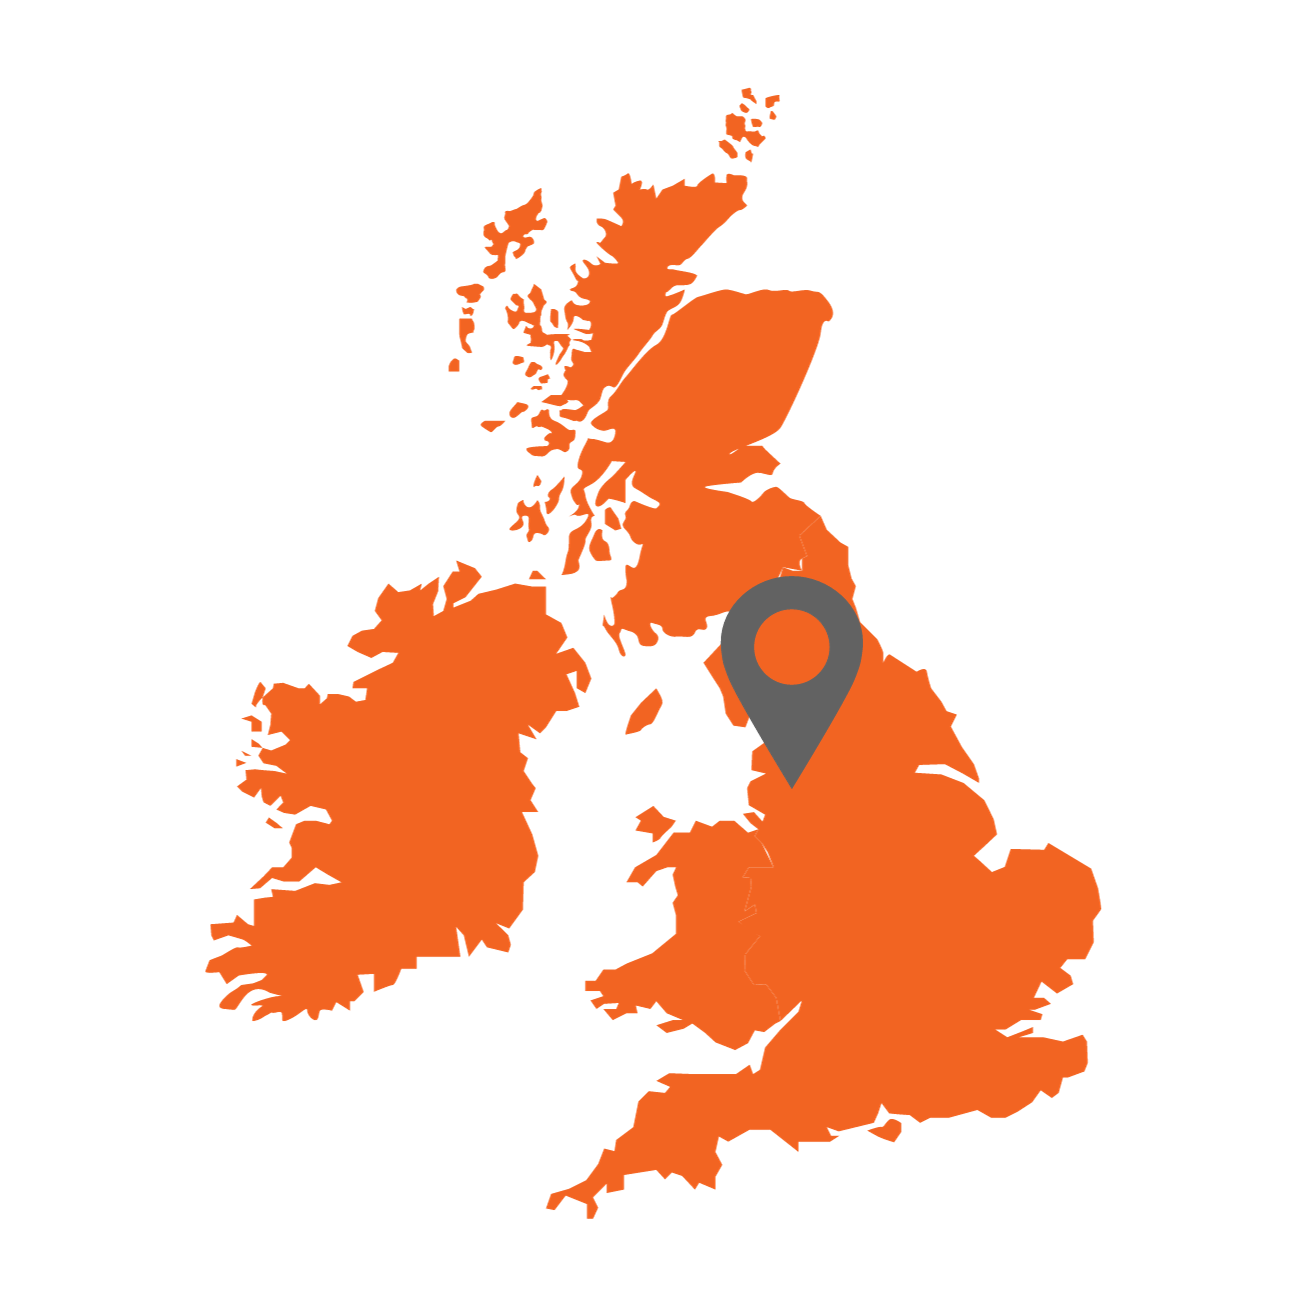 Orange map of the British Isles with a grey location marker on the North West